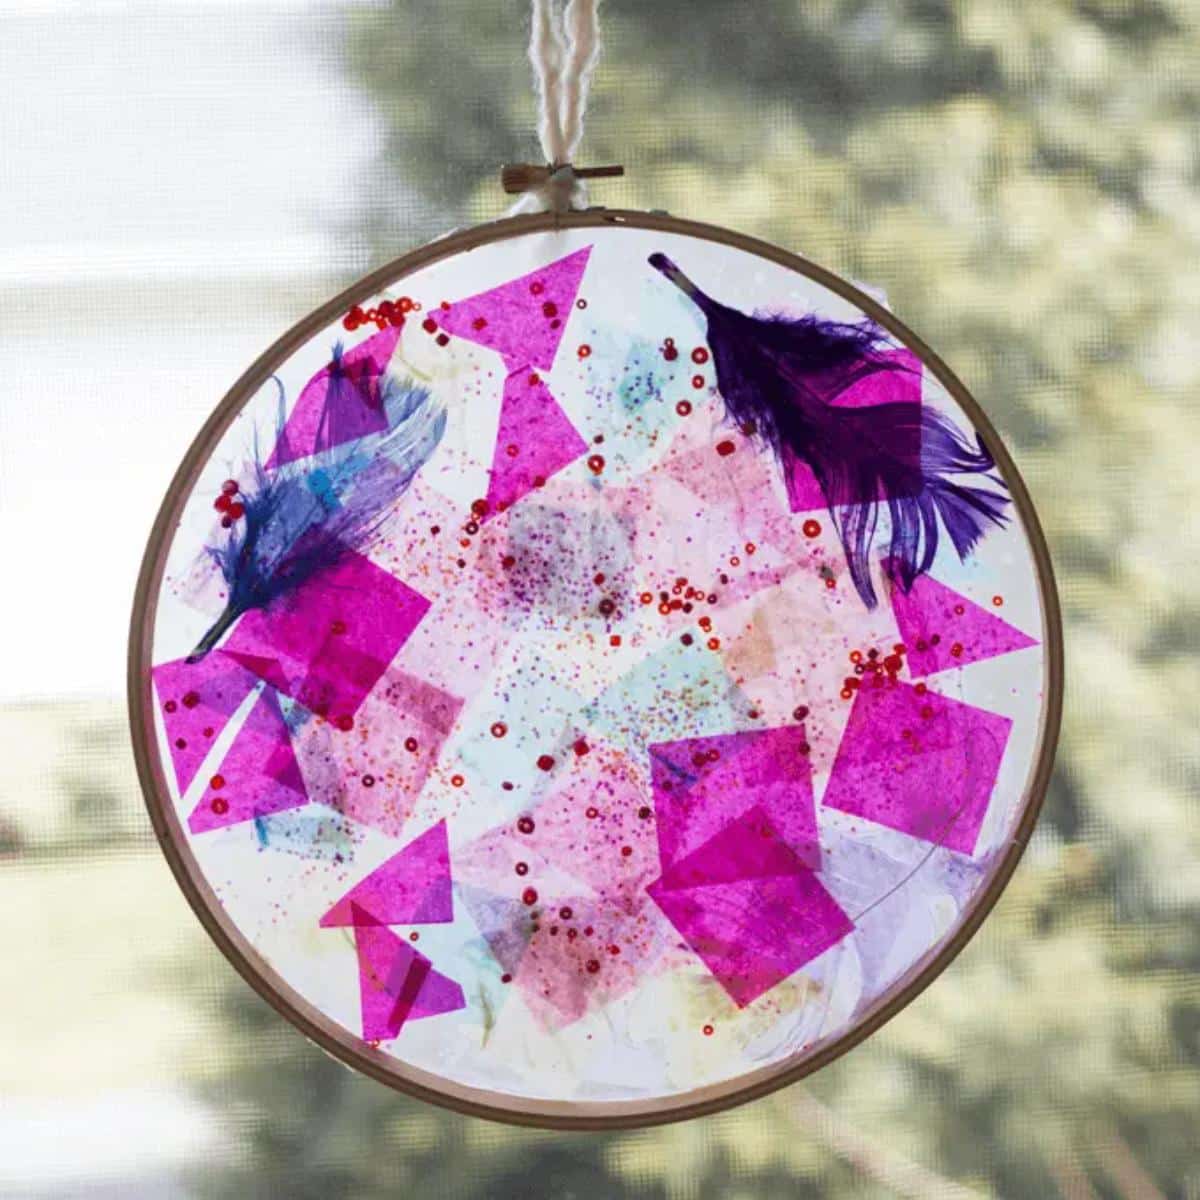 Tissue Paper Suncatcher in an Embroidery Hoop Frame